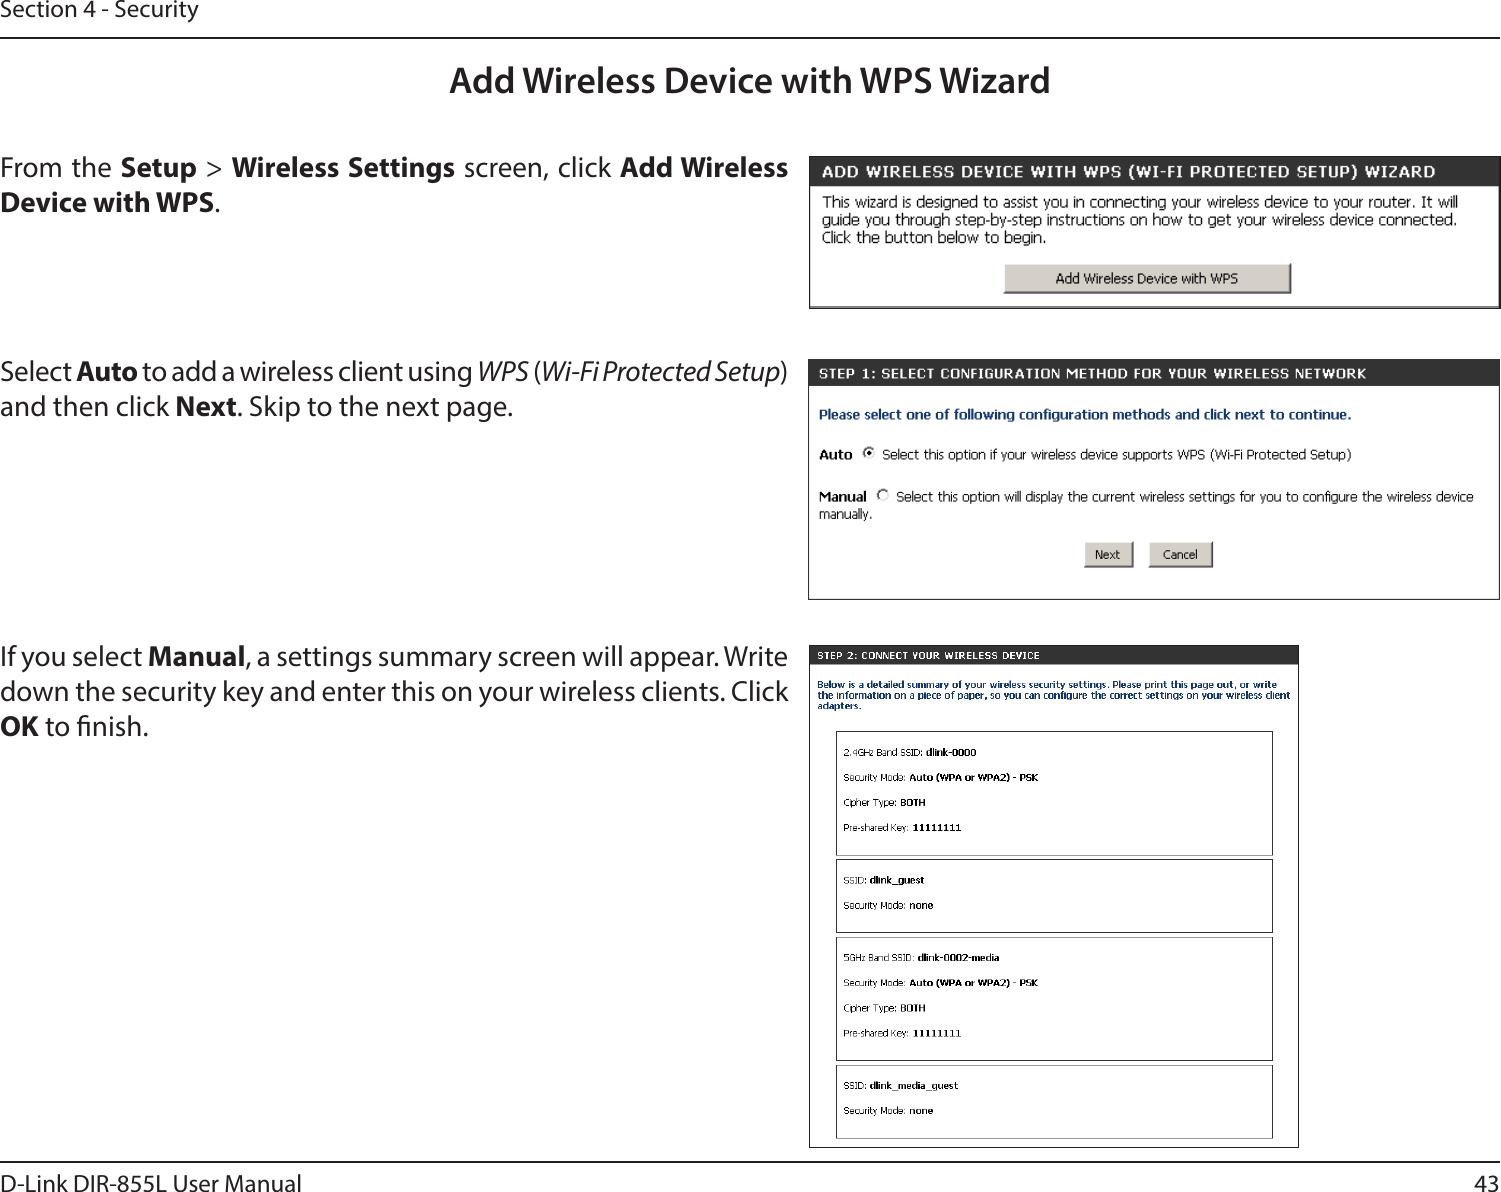 43D-Link DIR-855L User ManualSection 4 - SecurityFrom the Setup &gt; Wireless Settings screen, click Add Wireless Device with WPS.Add Wireless Device with WPS WizardIf you select Manual, a settings summary screen will appear. Write down the security key and enter this on your wireless clients. Click OK to nish.Select Auto to add a wireless client using WPS (Wi-Fi Protected Setup) and then click Next. Skip to the next page. 